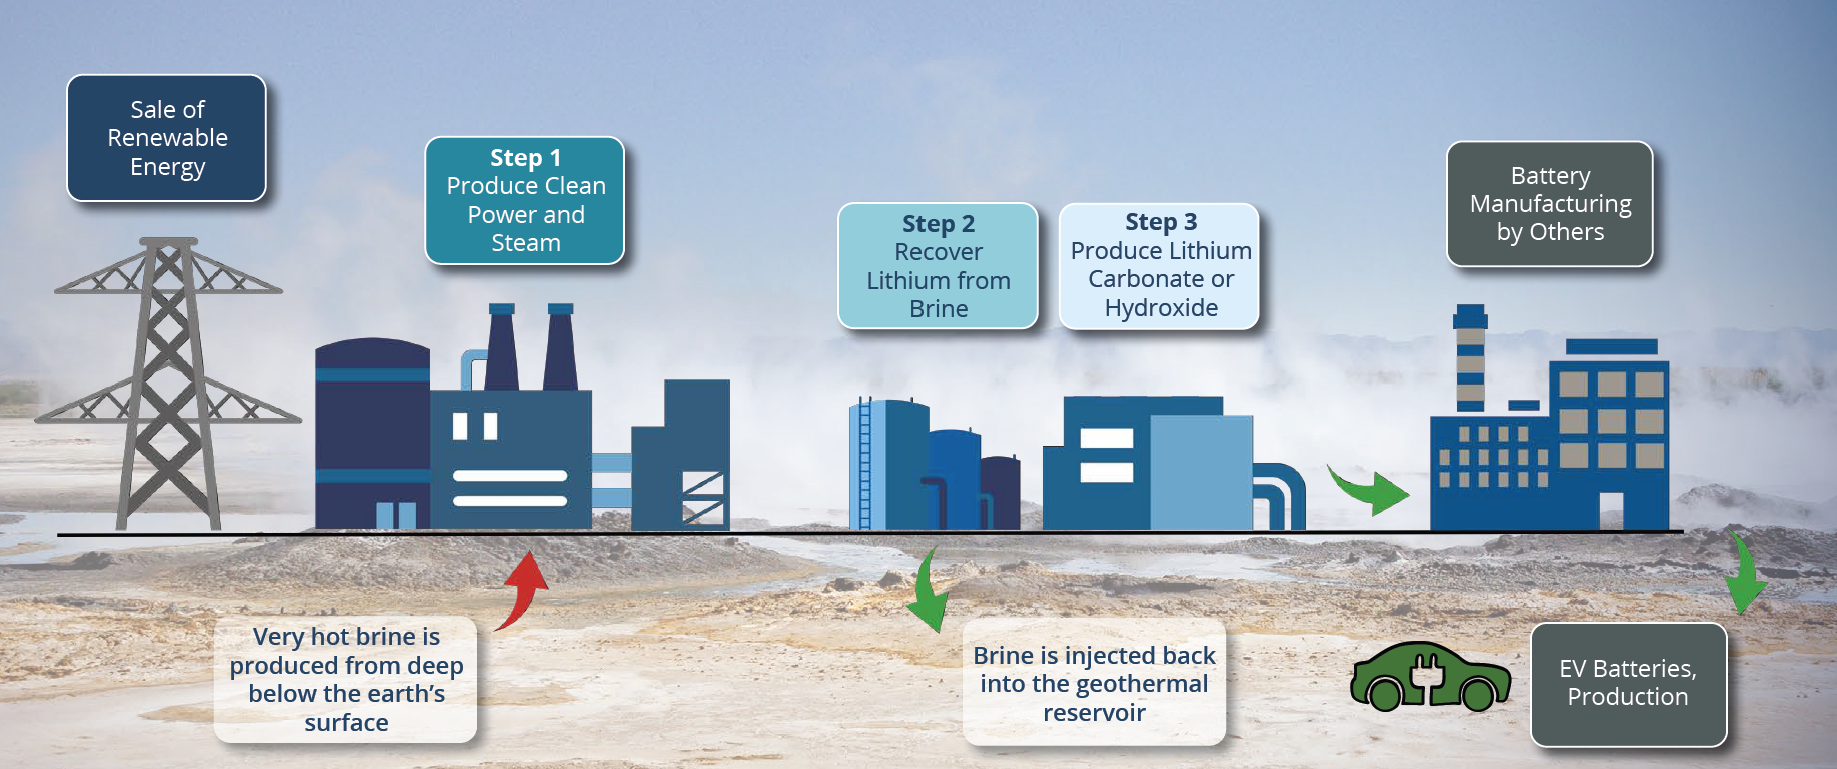 A flowchart demonstrates the geothermal power and lithium extraction process. After the sale of renewable energy, step one is to produce clean power and stream. Very hot brine is produced from deep below the earth's surface. Step two is to recover lithium from the brine. Brine is injected back into the geothermal reservoir. Step three is to produce lithium carbonate or hydroxide. Battery manufacturing by others yields electric vehicle batteries and production.